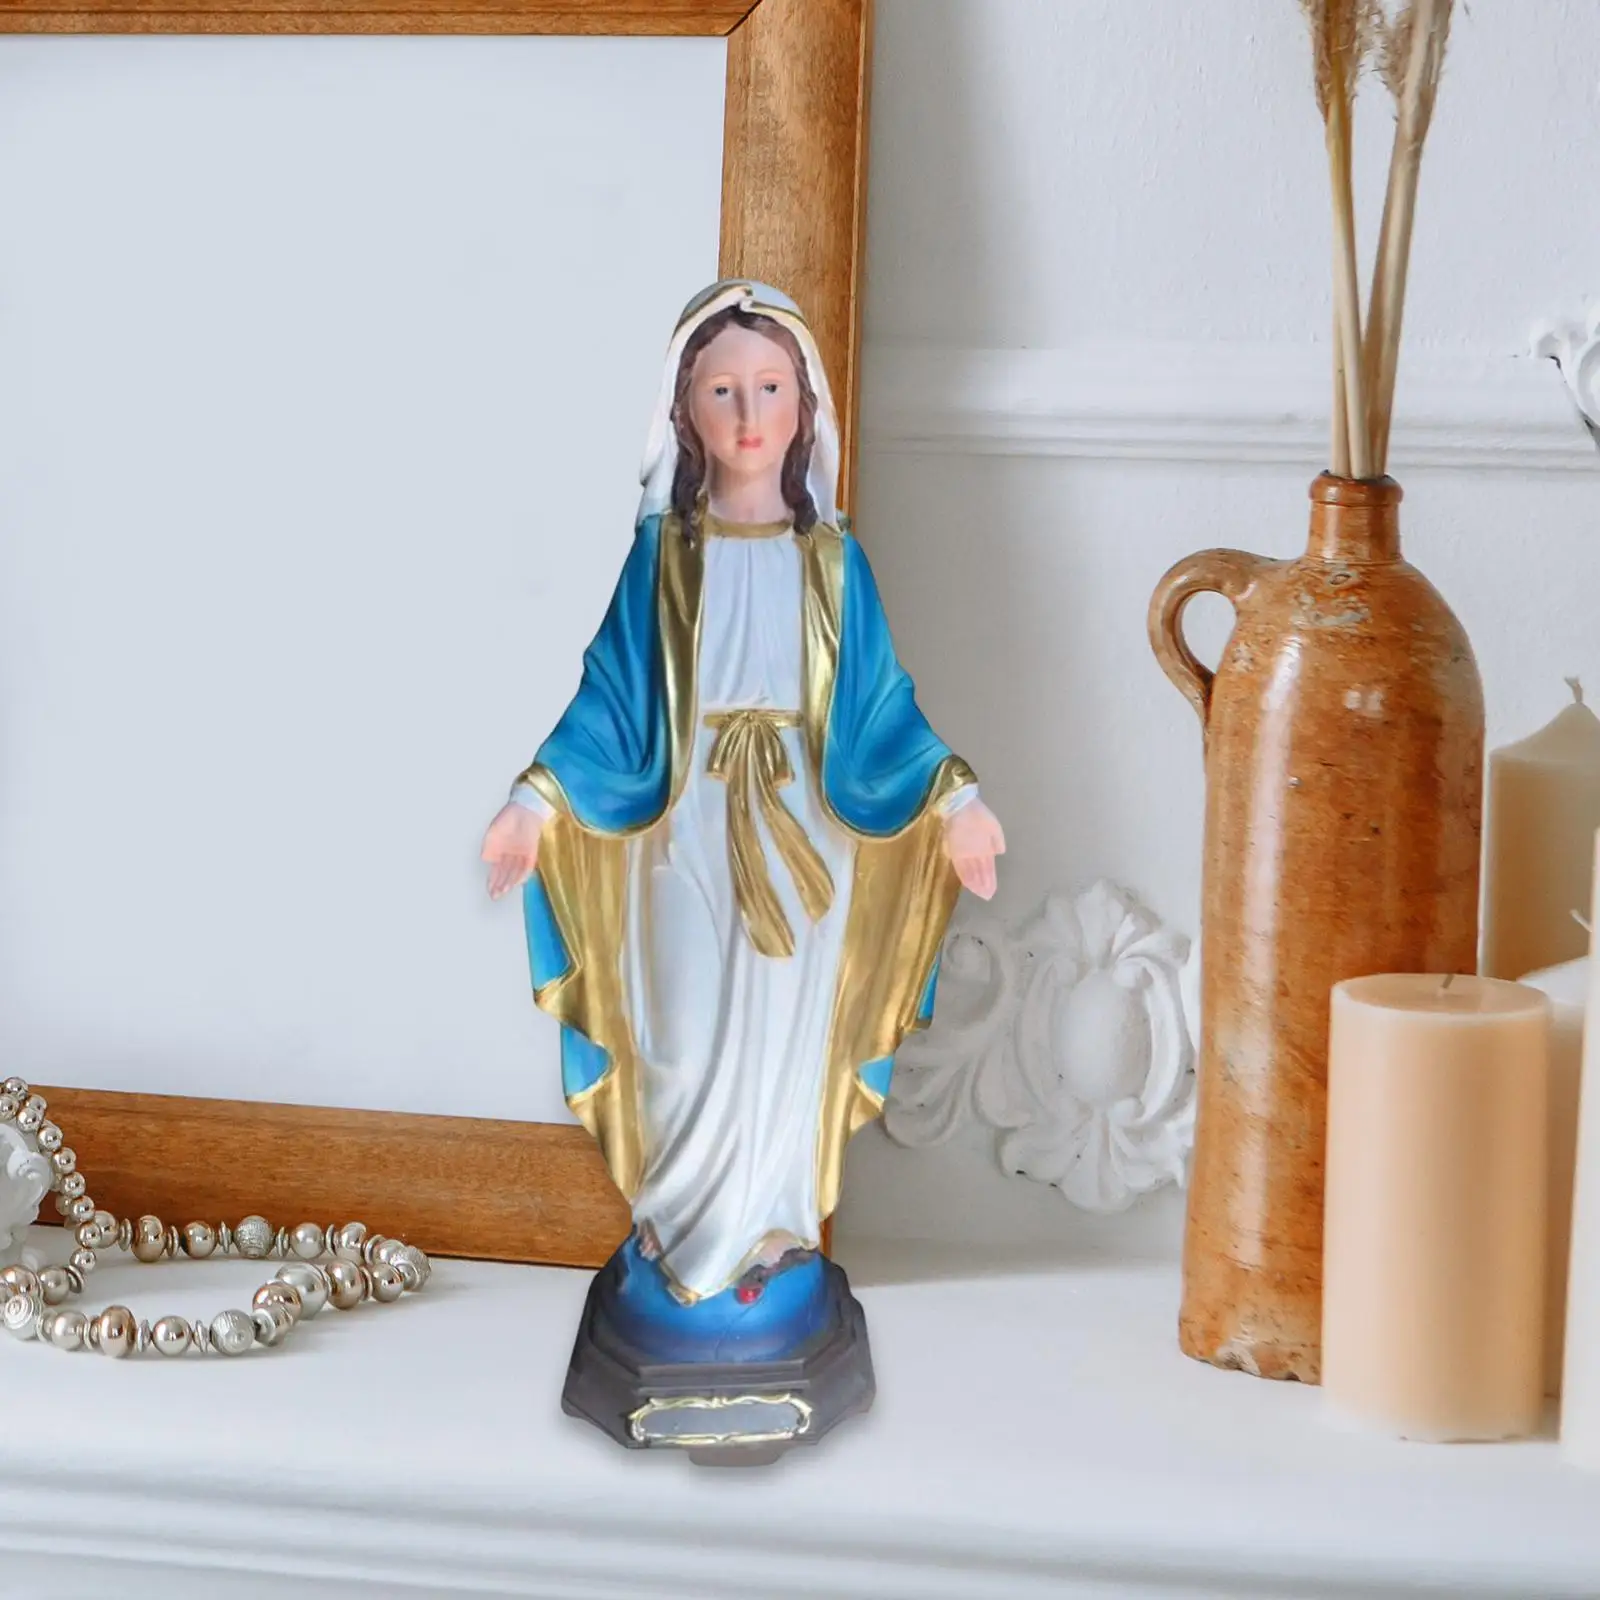 Blessed Virgin Mary Figurine Collection Decorative Statue Wedding Gift